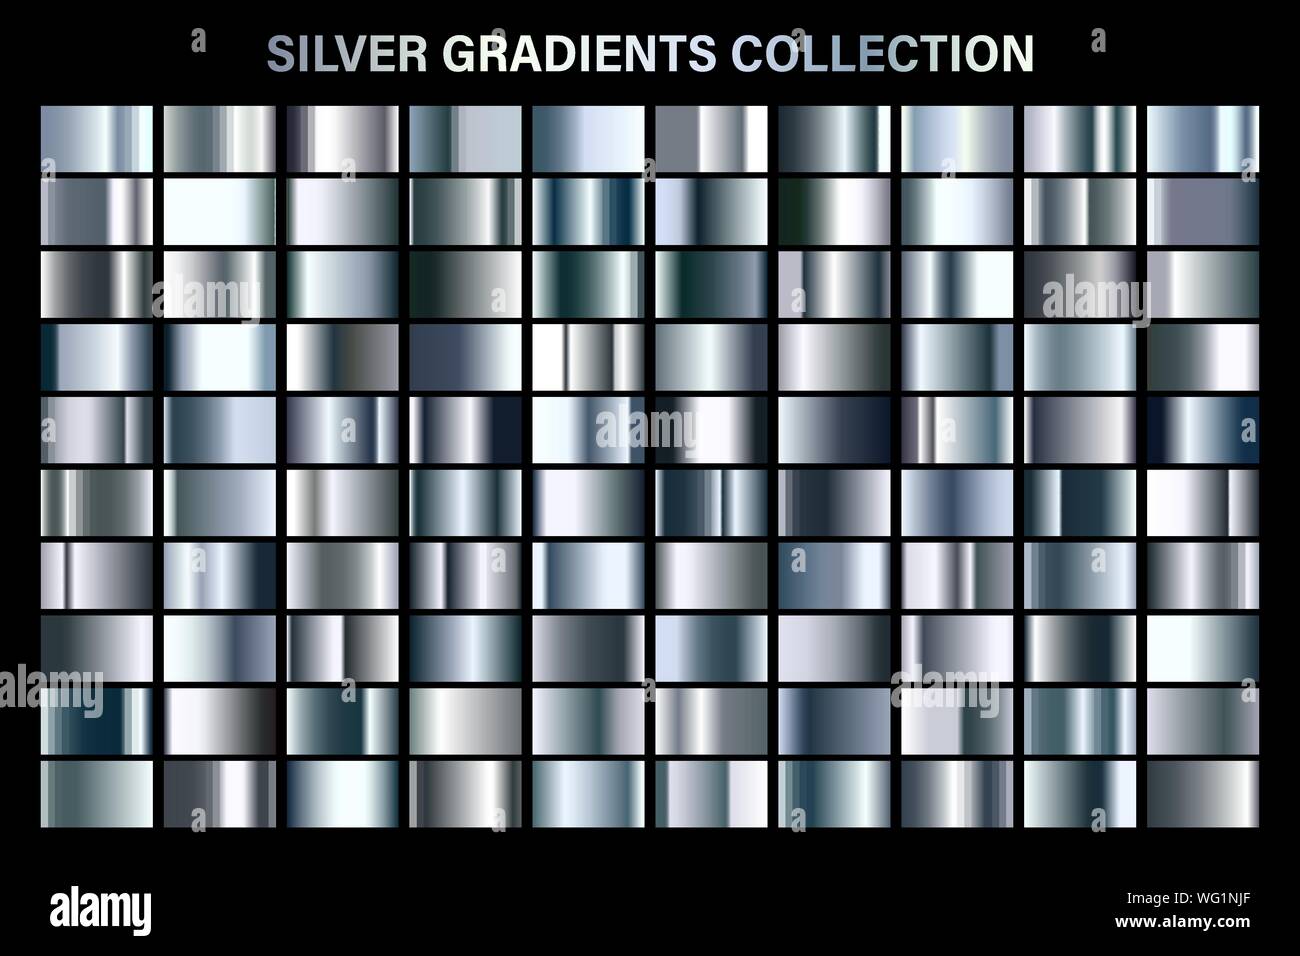 Silver foil background metal textured shiny Vector Image